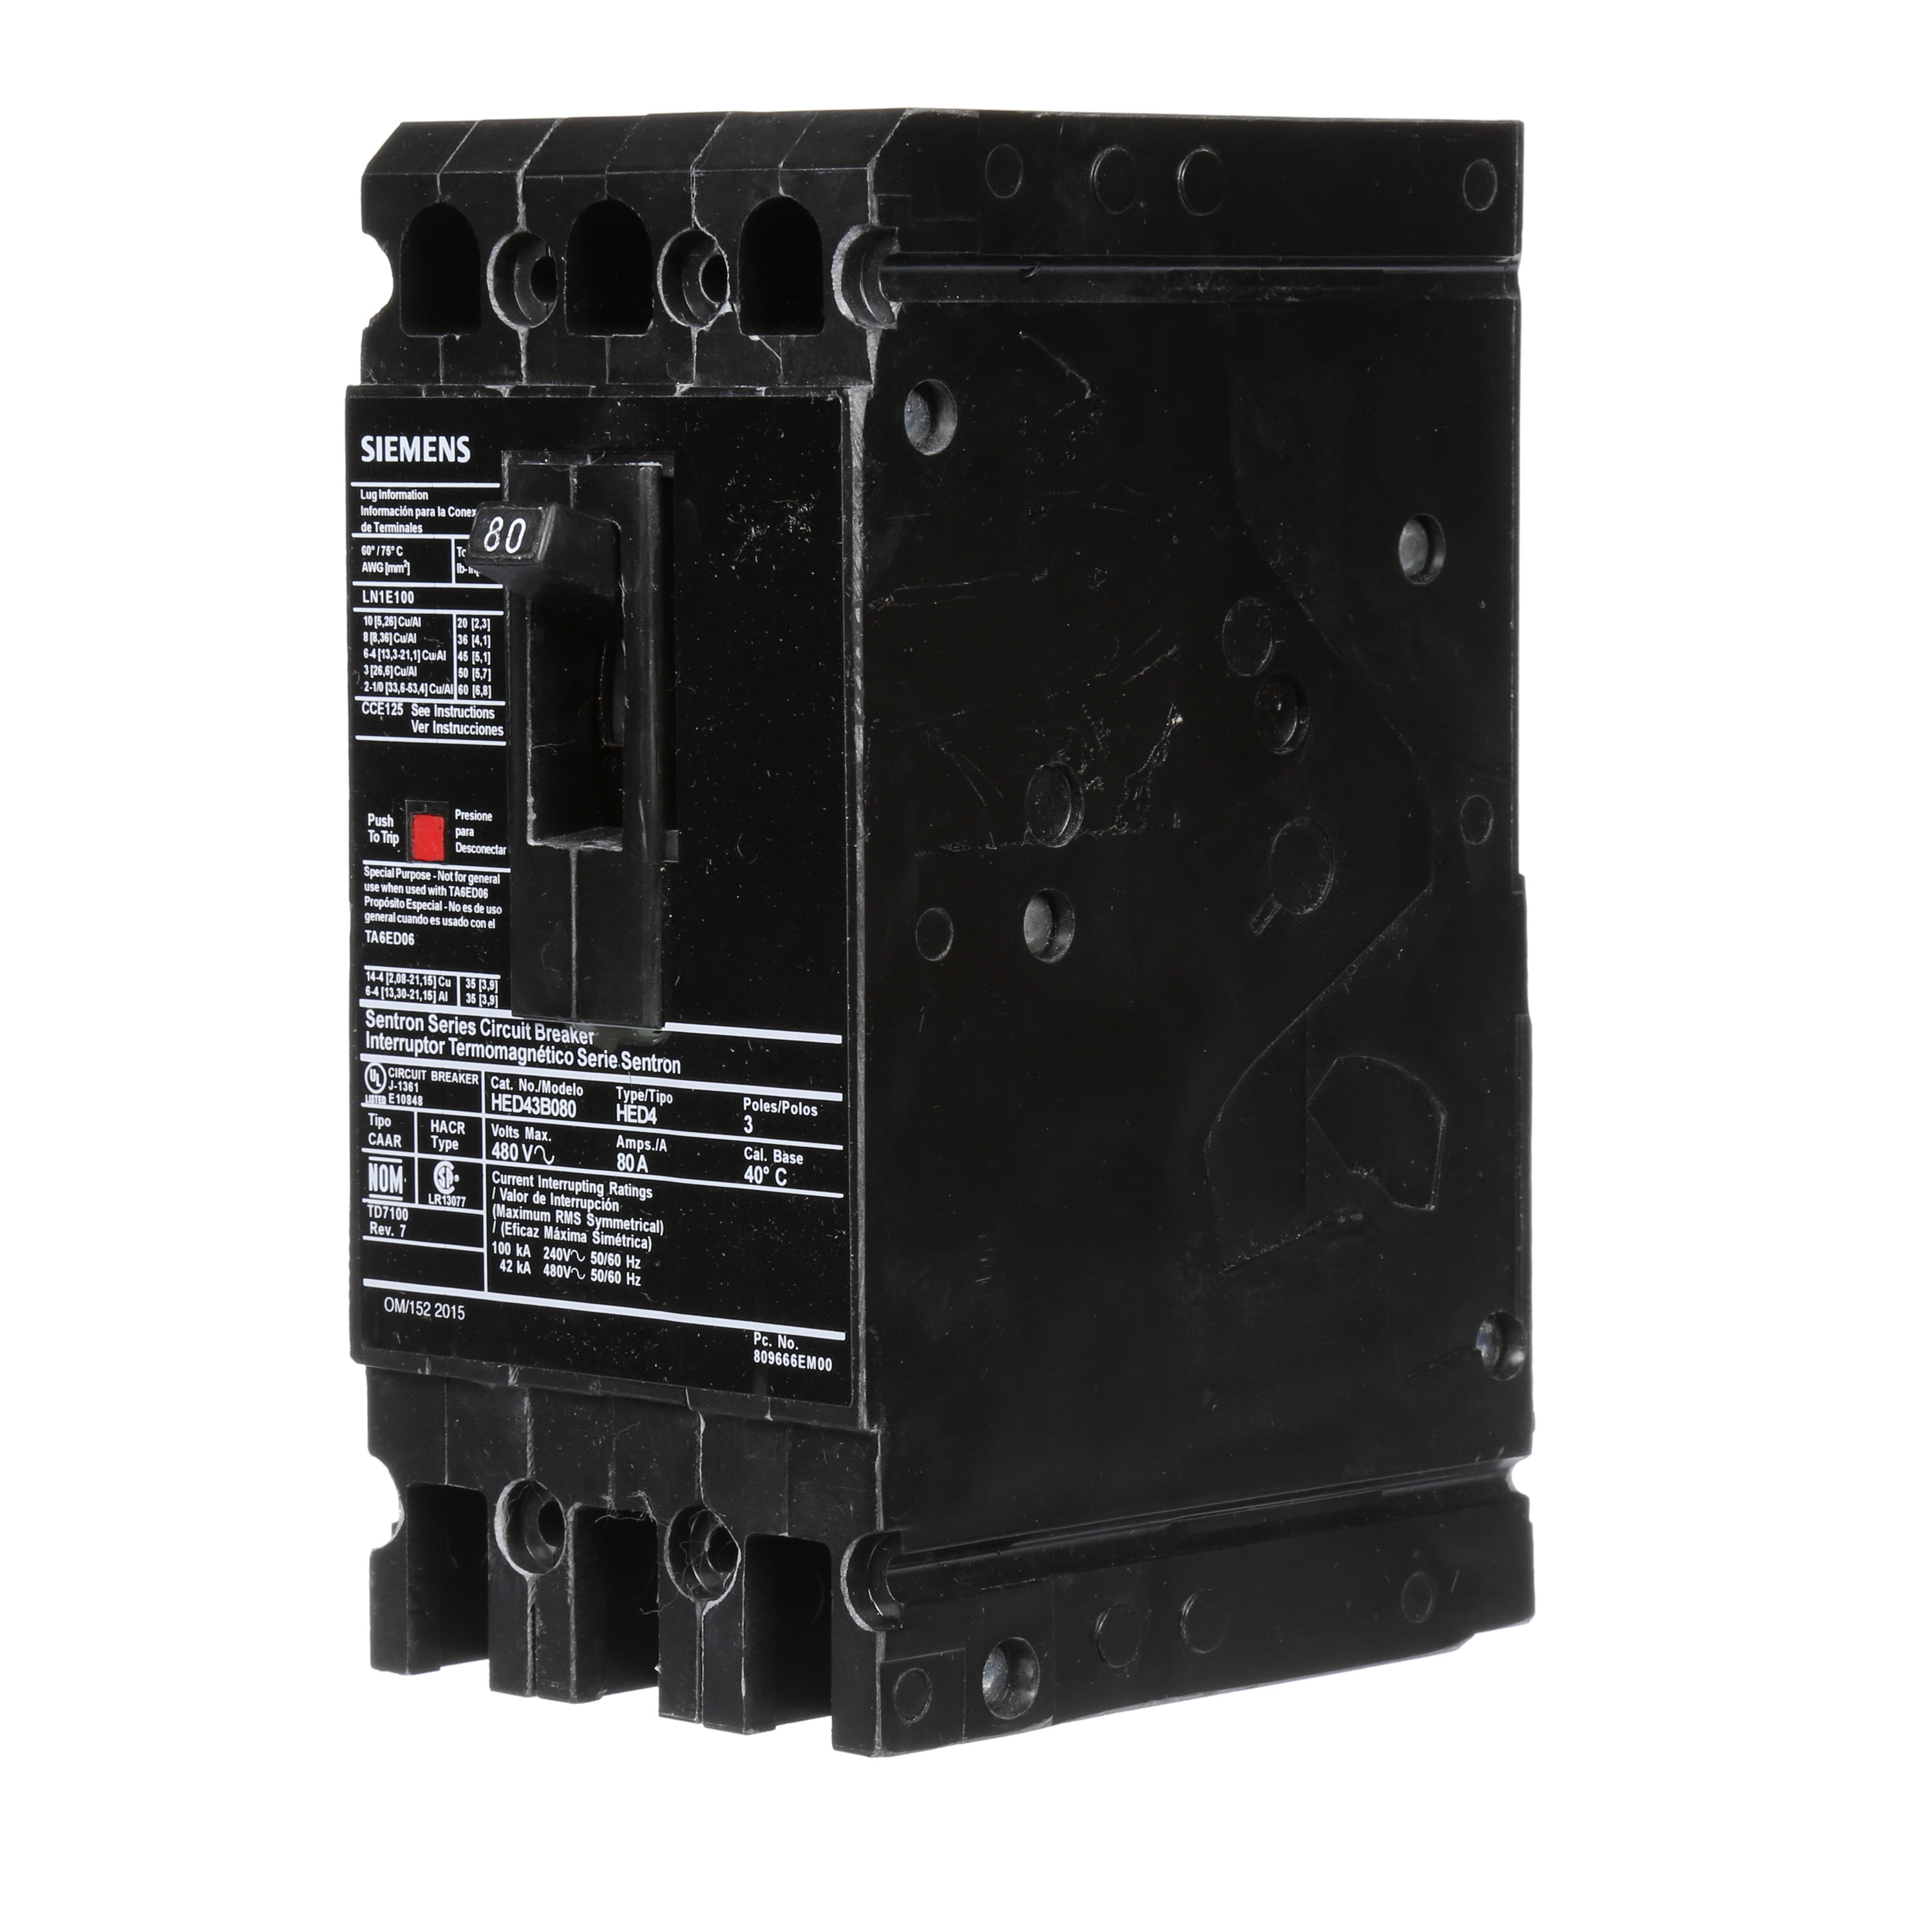 SIEMENS LOW VOLTAGE SENTRON MOLDED CASE CIRCUIT BREAKER WITH THERMAL - MAGNETICTRIP UNIT. STANDARD 40 DEG C BREAKER ED FRAME WITH HIGH BREAKING CAPACITY. 80A 3-POLE (42KAIC AT 480V). NON-INTERCHANGEABLE TRIP UNIT. SPECIAL FEATURES LOAD LUGS ONLY (LN1E100) WIRE RANGE 10 - 1/0AWG (CU/AL). DIMENSIONS (W x H x D) IN 3.00x 6.4 x 3.92.